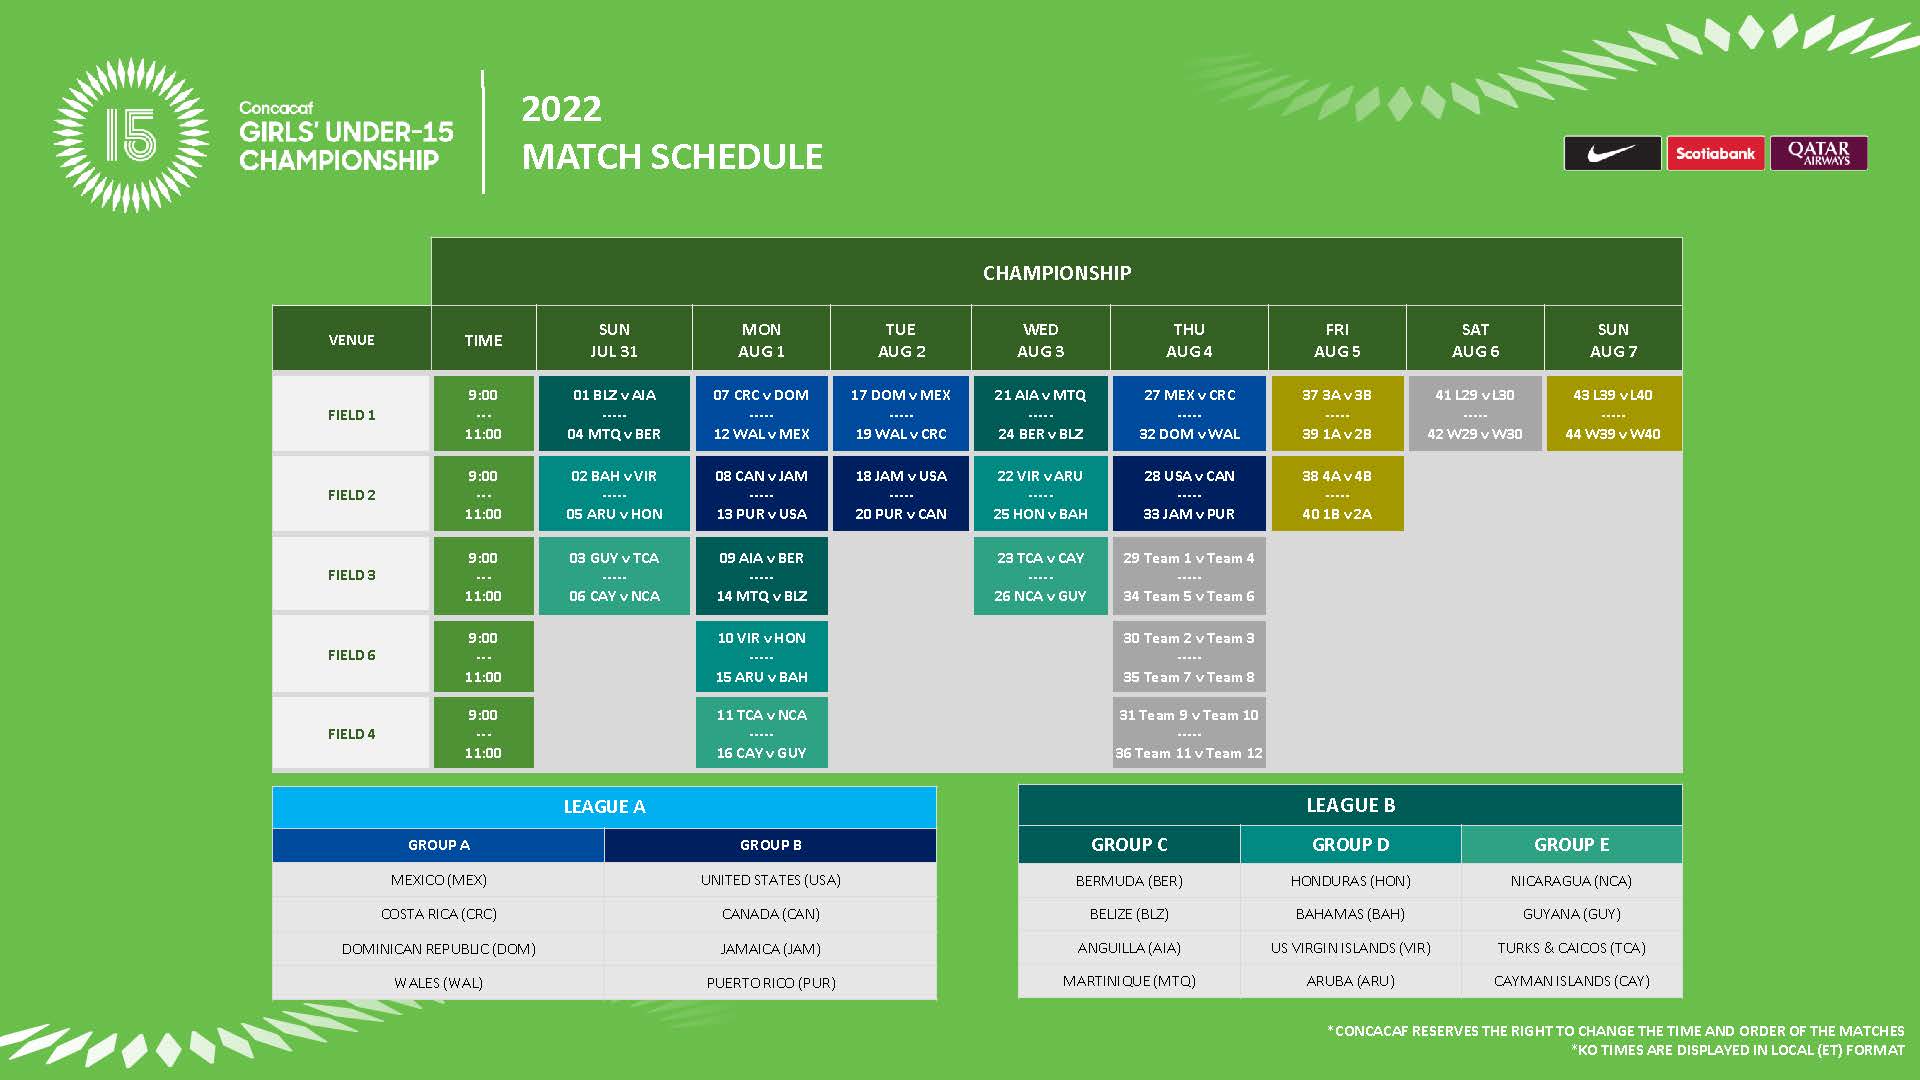 Schedule and groups confirmed for 2022 Concacaf Girls’ U15 Championship